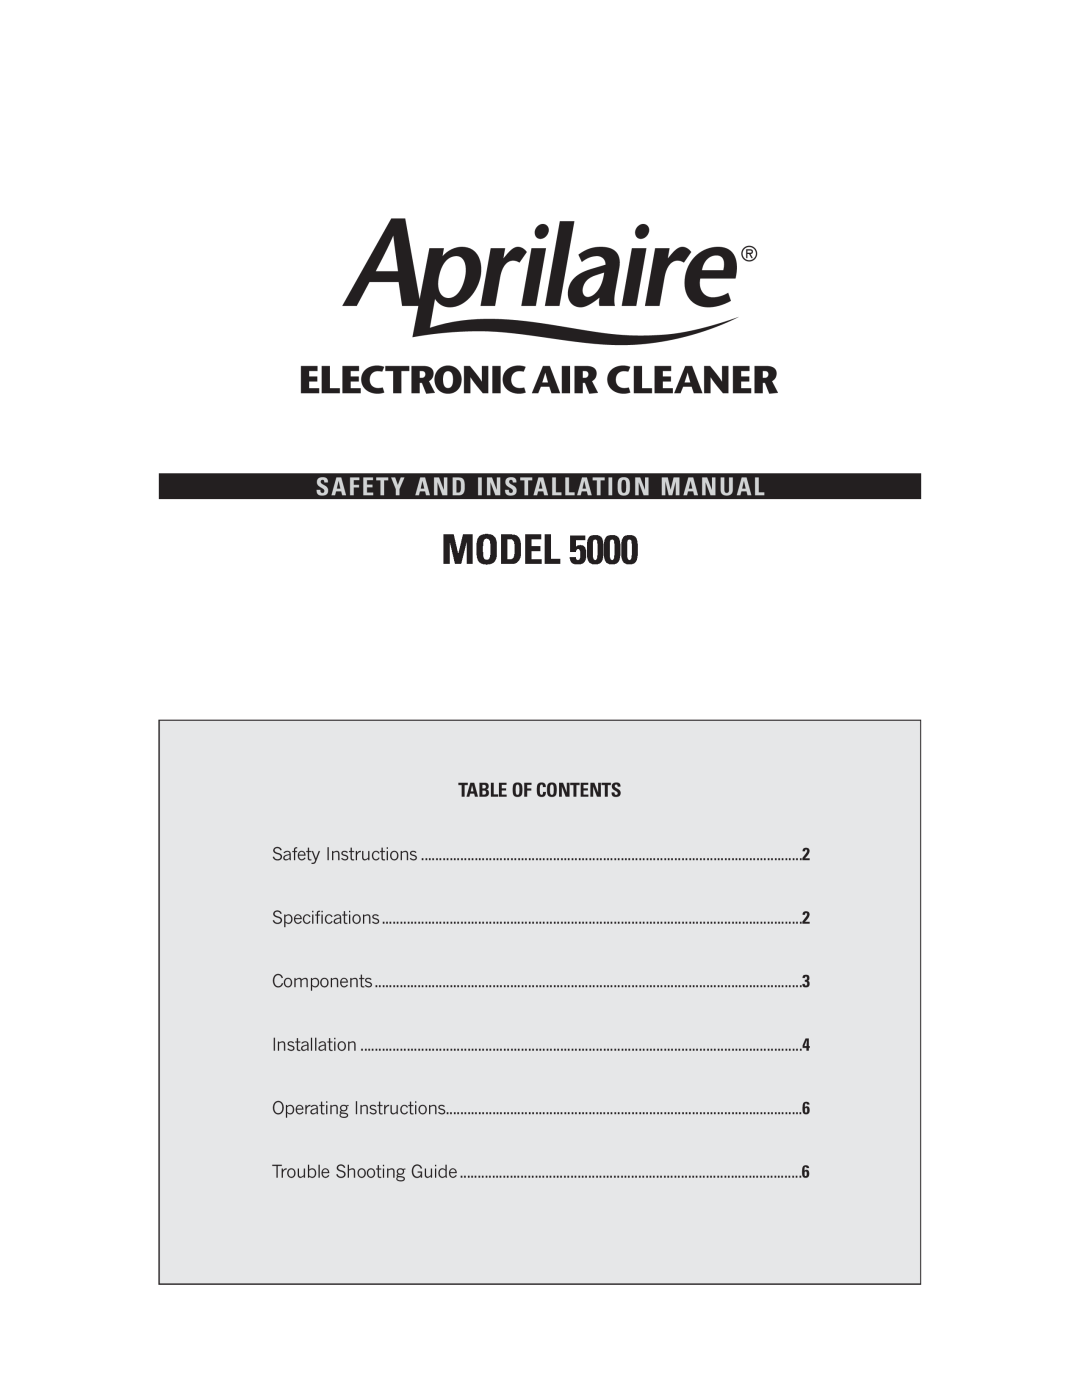 Aprilaire 5000 installation manual Safety And Installation Manual, Model, Electronic Air Cleaner, Table Of Contents 